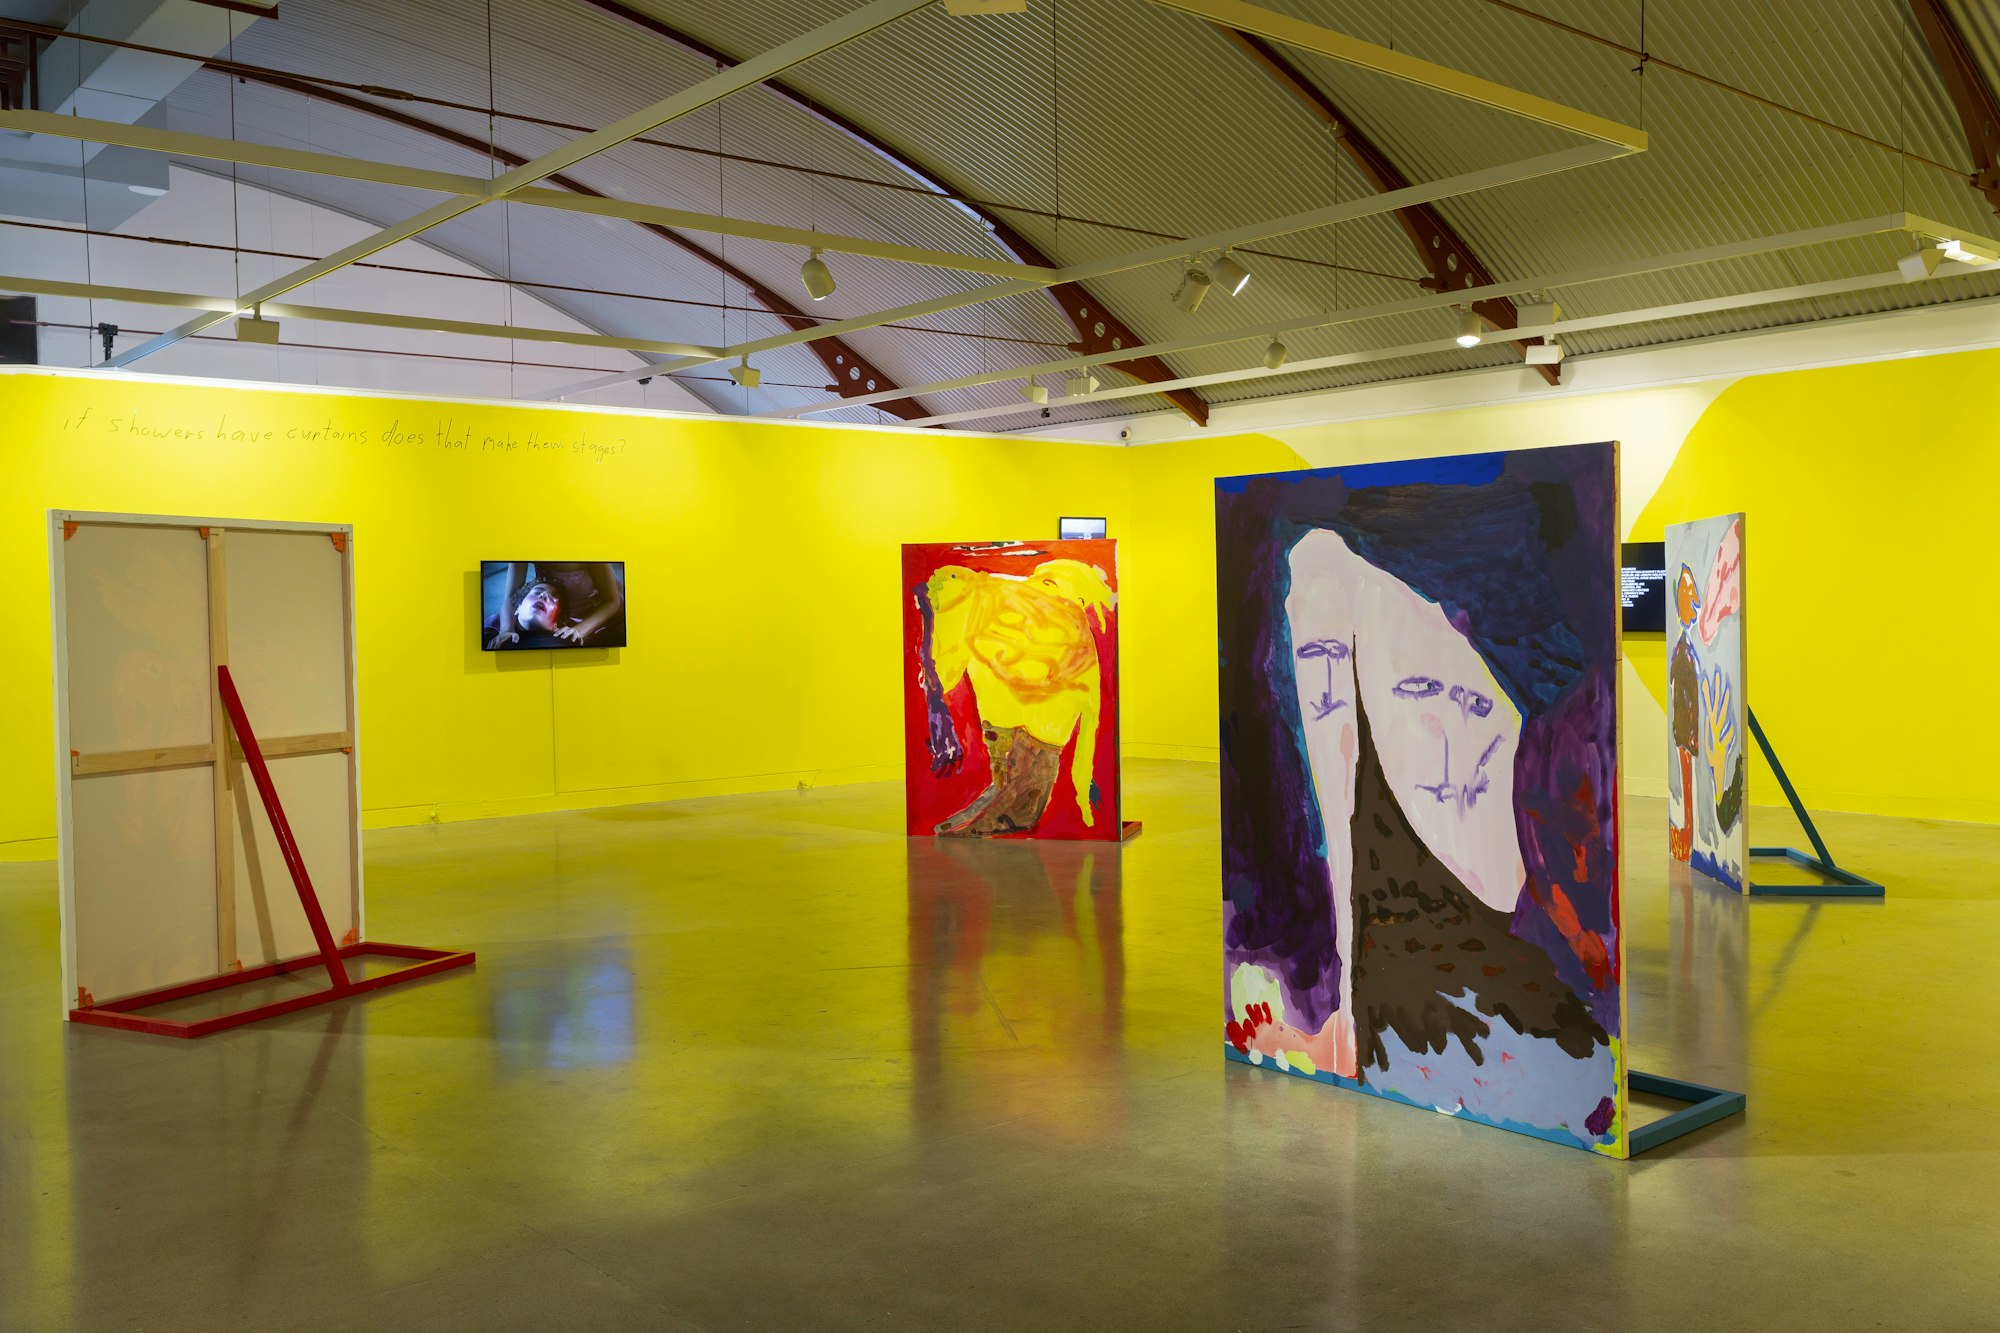 Four large paintings are propped up on a gallery floor. Around them are partial-height  walls painted bright yellow on which hang a few video screens.